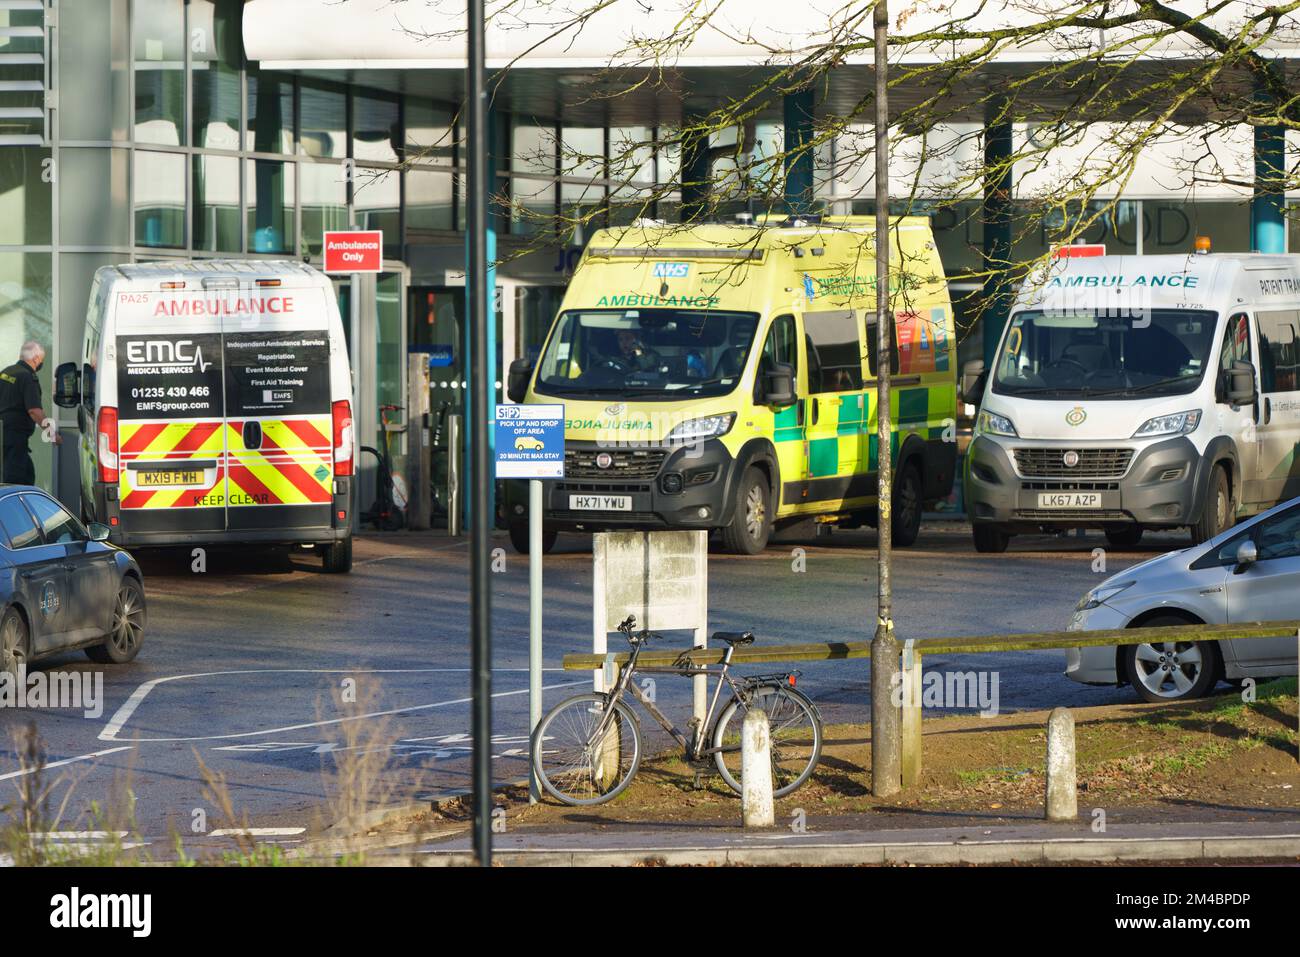 December 20th 2022. Oxford, UK. Following on from the nures strike, Ambulance crews in England and Wales will strike tomorrow December 21st. PICTURED: Ambulances wait at The John Radcliffe Hospital, Oxford. Bridget Catterall/AlamyLiveNews Stock Photo